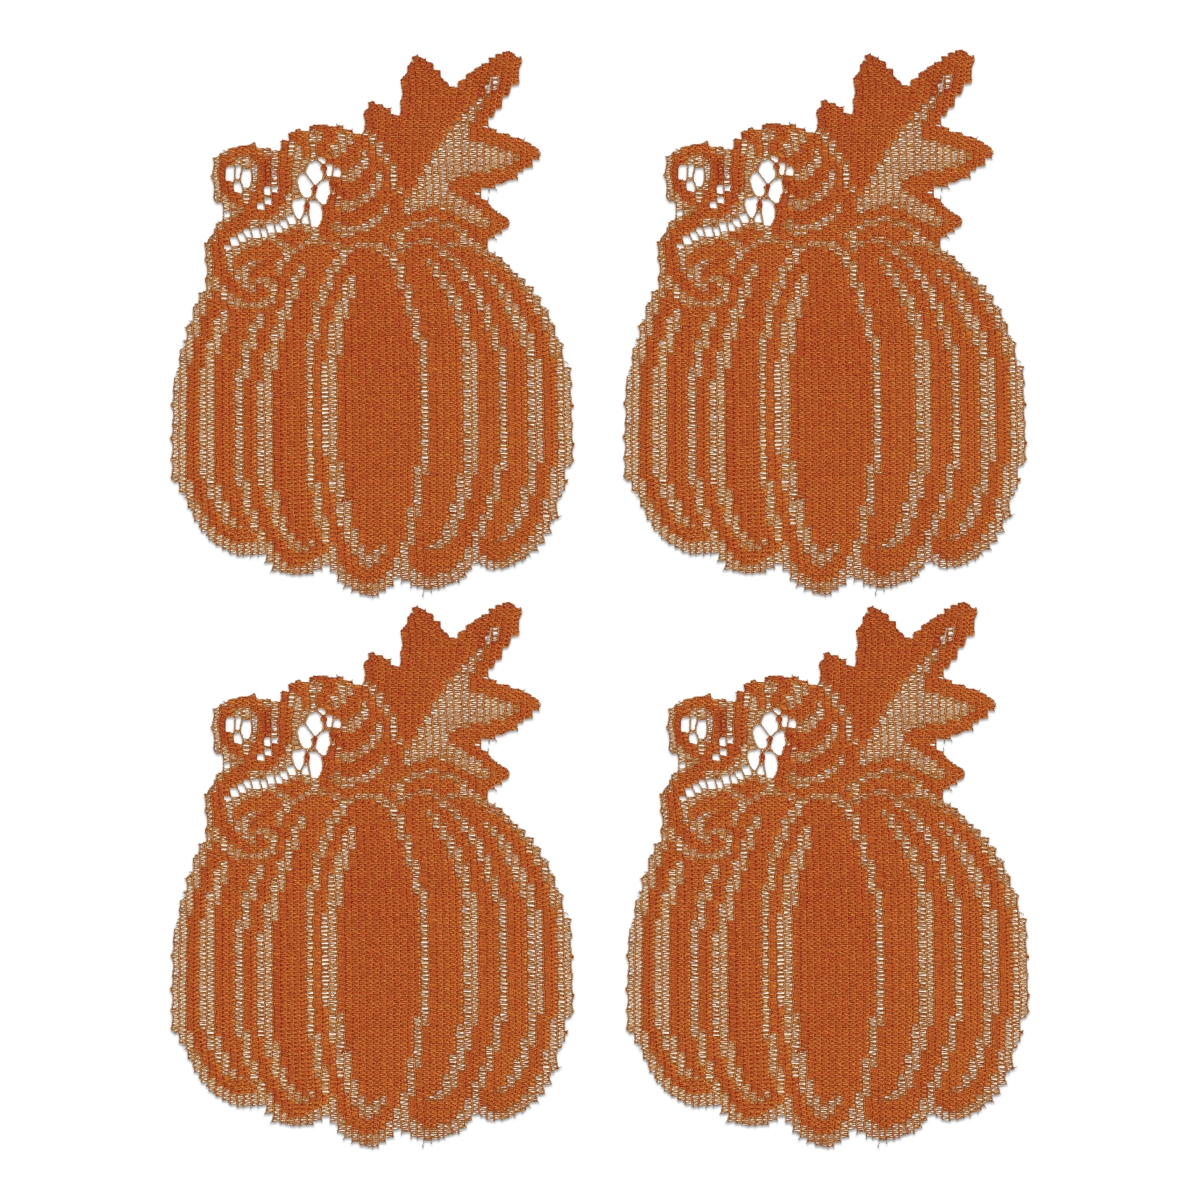 Picture of Heritage Lace PV-0607O-S 6 x 7 in. Pumpkin Vine Doilies - Orange - Set of 4